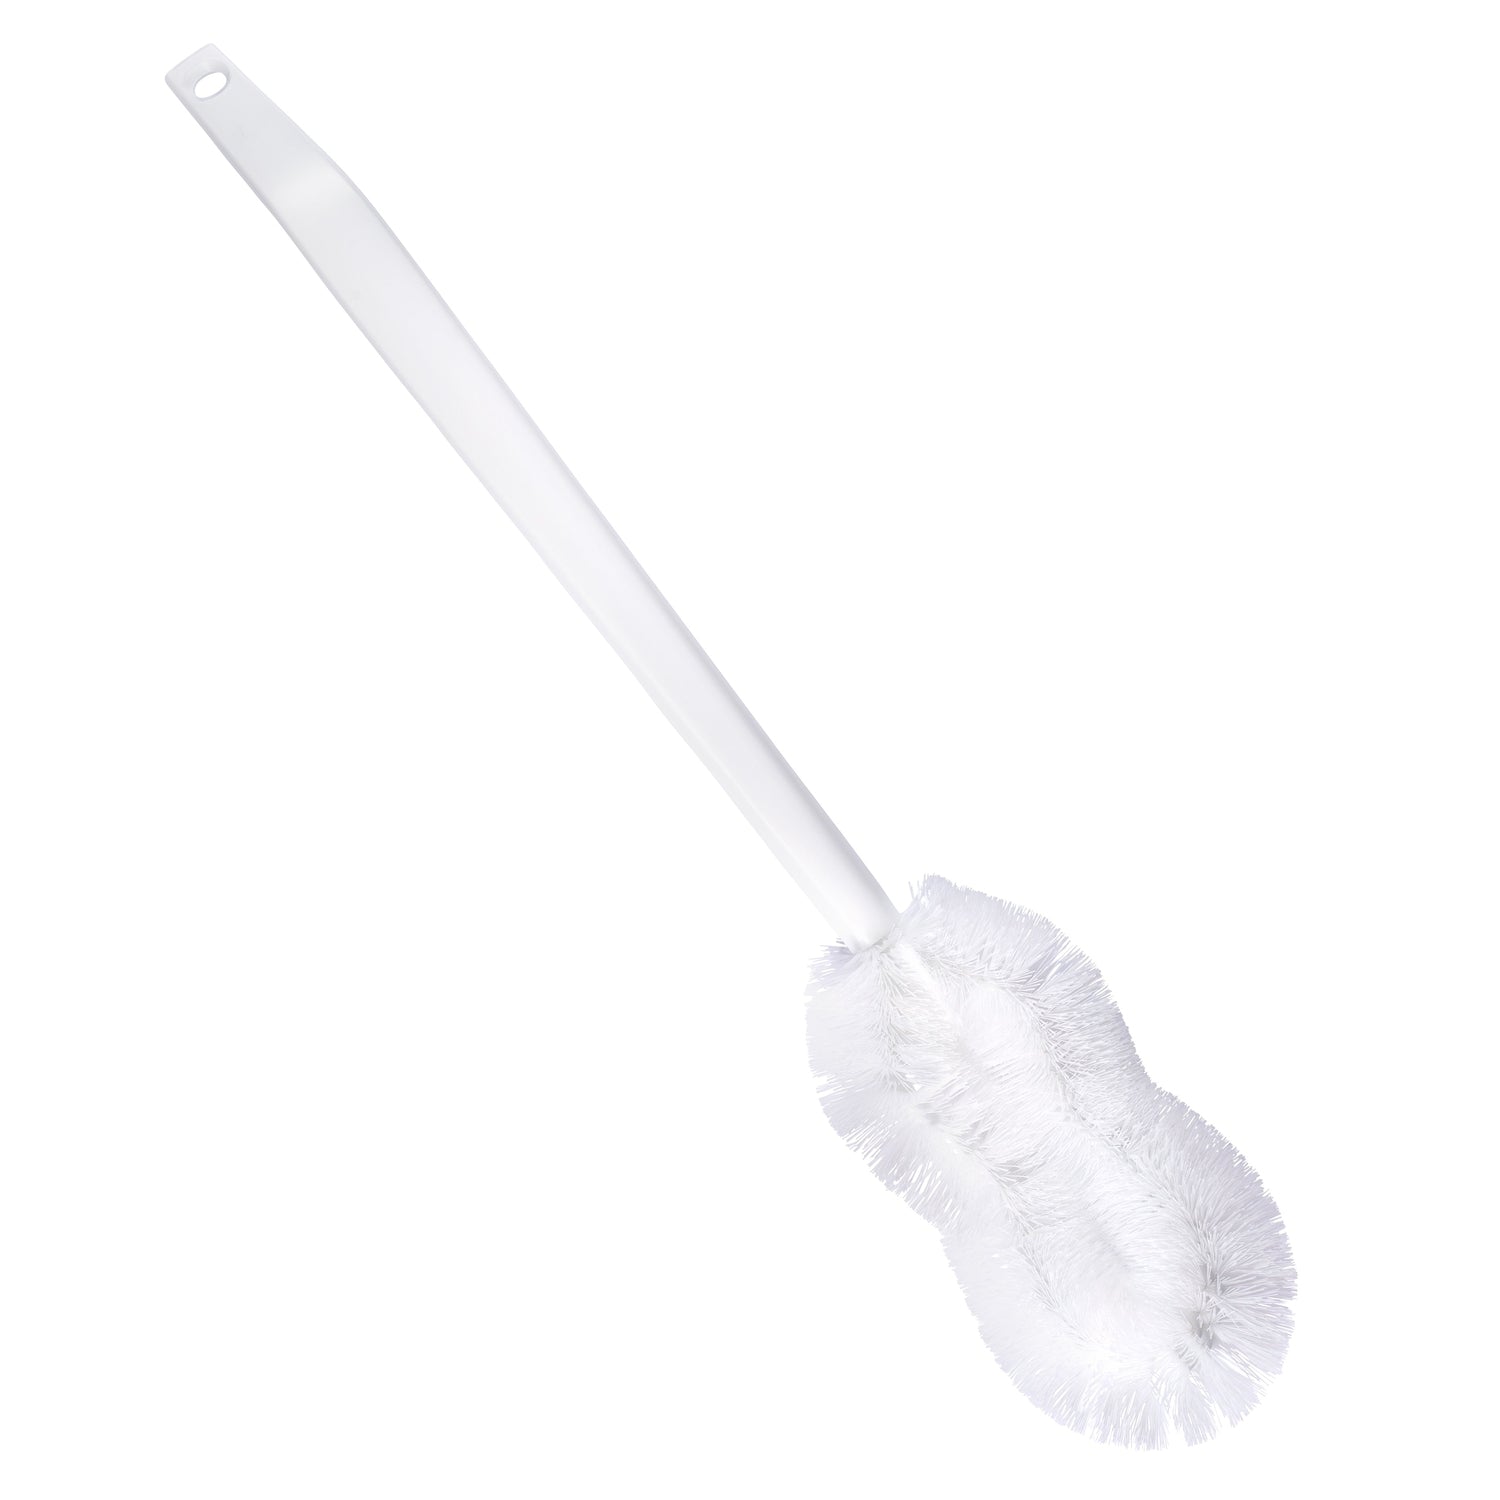 https://cdn.shopify.com/s/files/1/0430/0704/9886/products/bath-back-scrubber-20-body-brush-w-figure-8-design-for-stimulation-other-brushes.jpg?v=1596017627